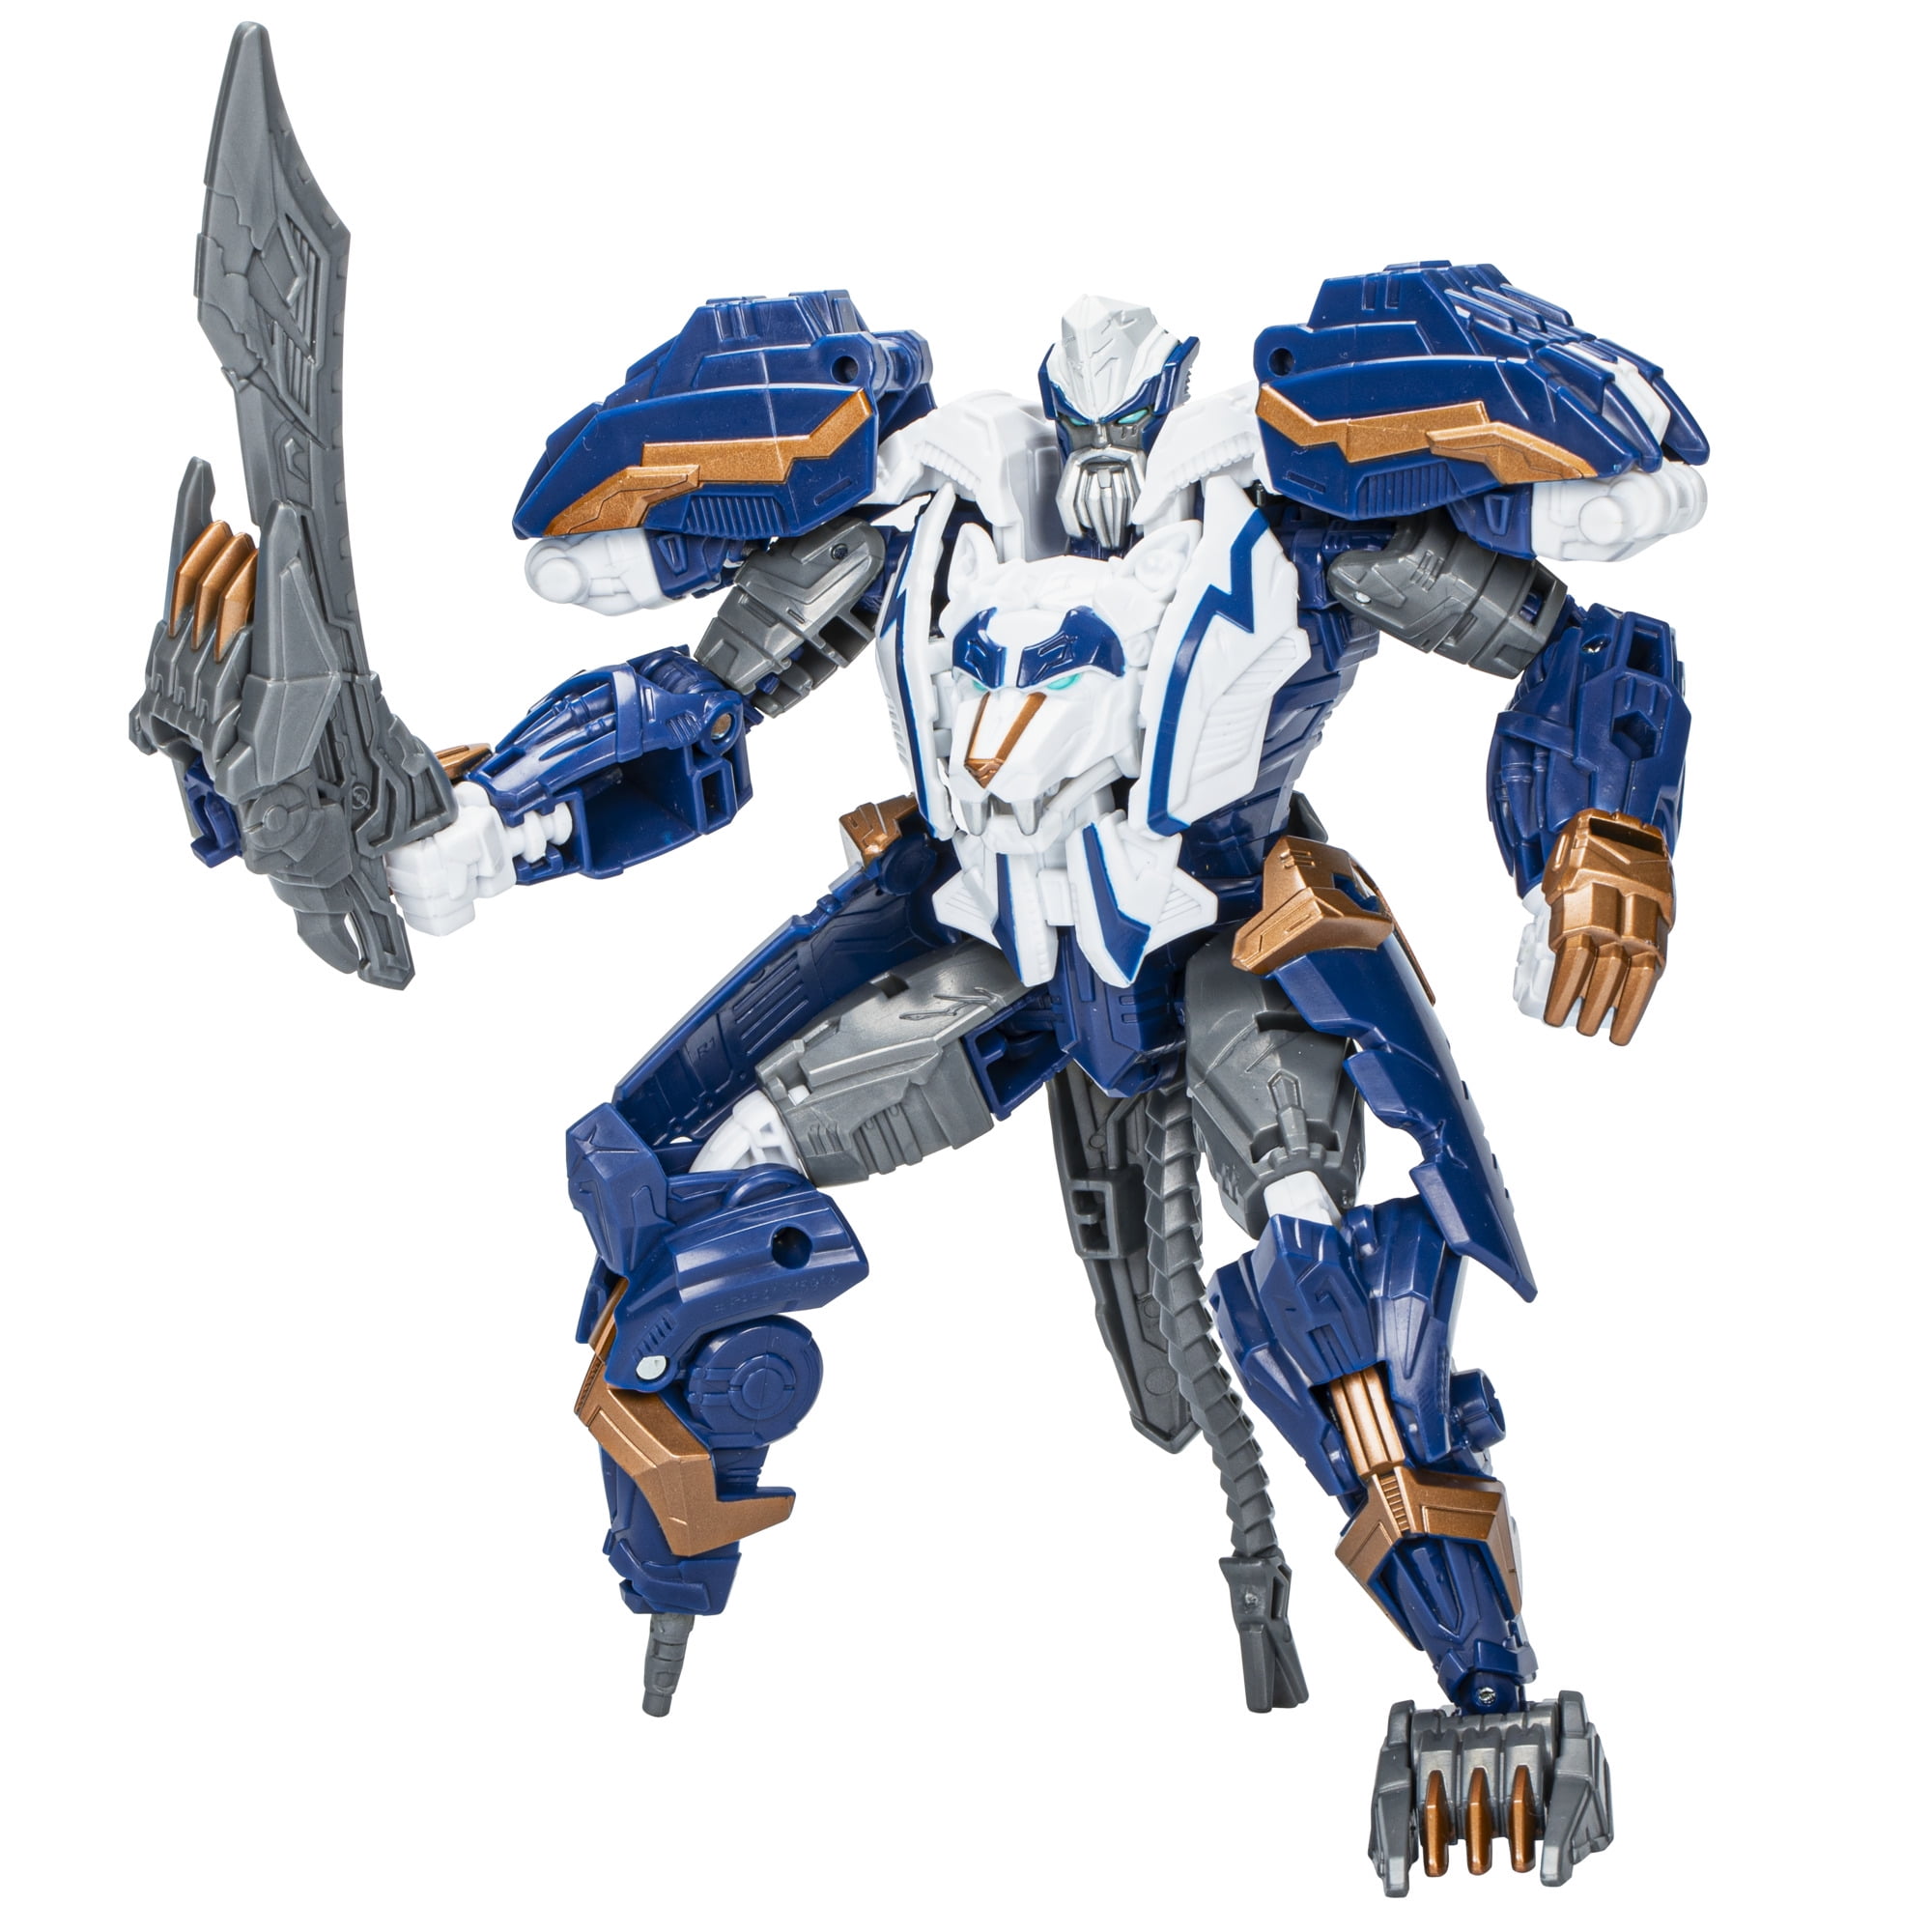 New Transformers Legacy United Animated Universe Figures Going Up